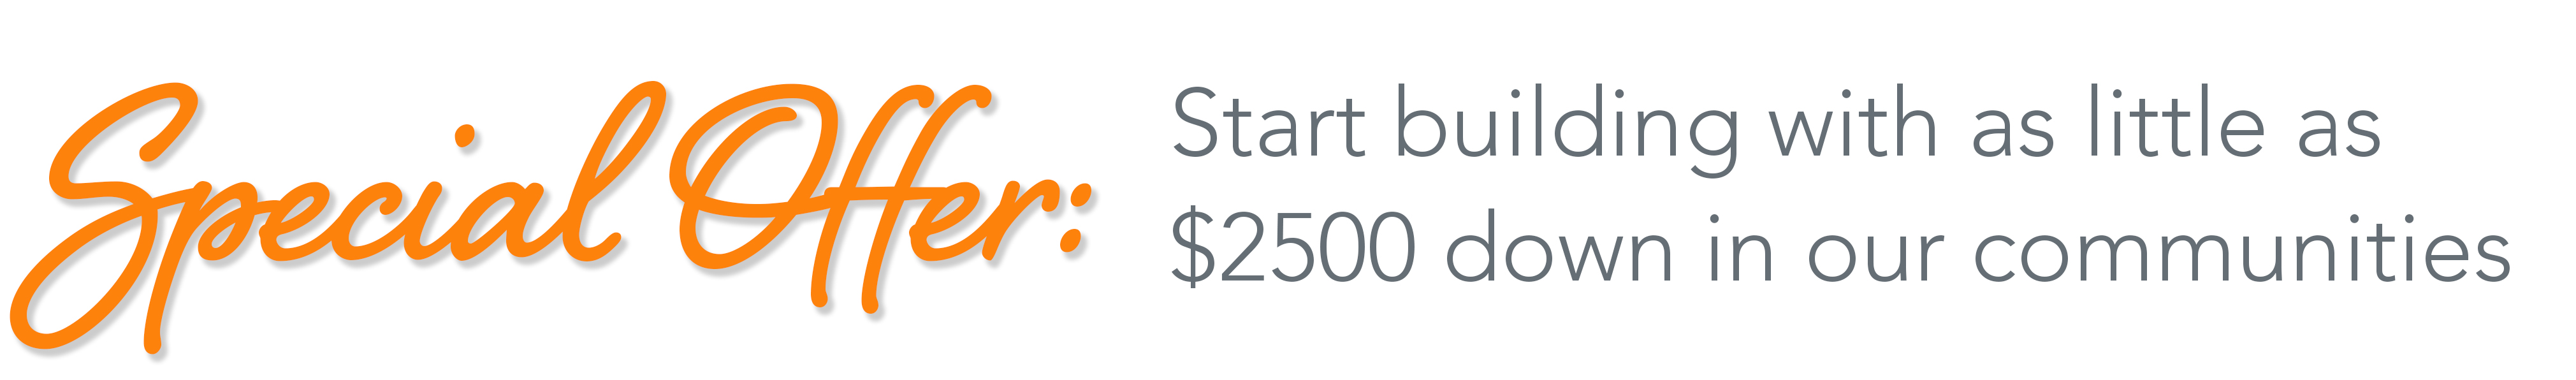 Special offer - start building with as little as $2500 down